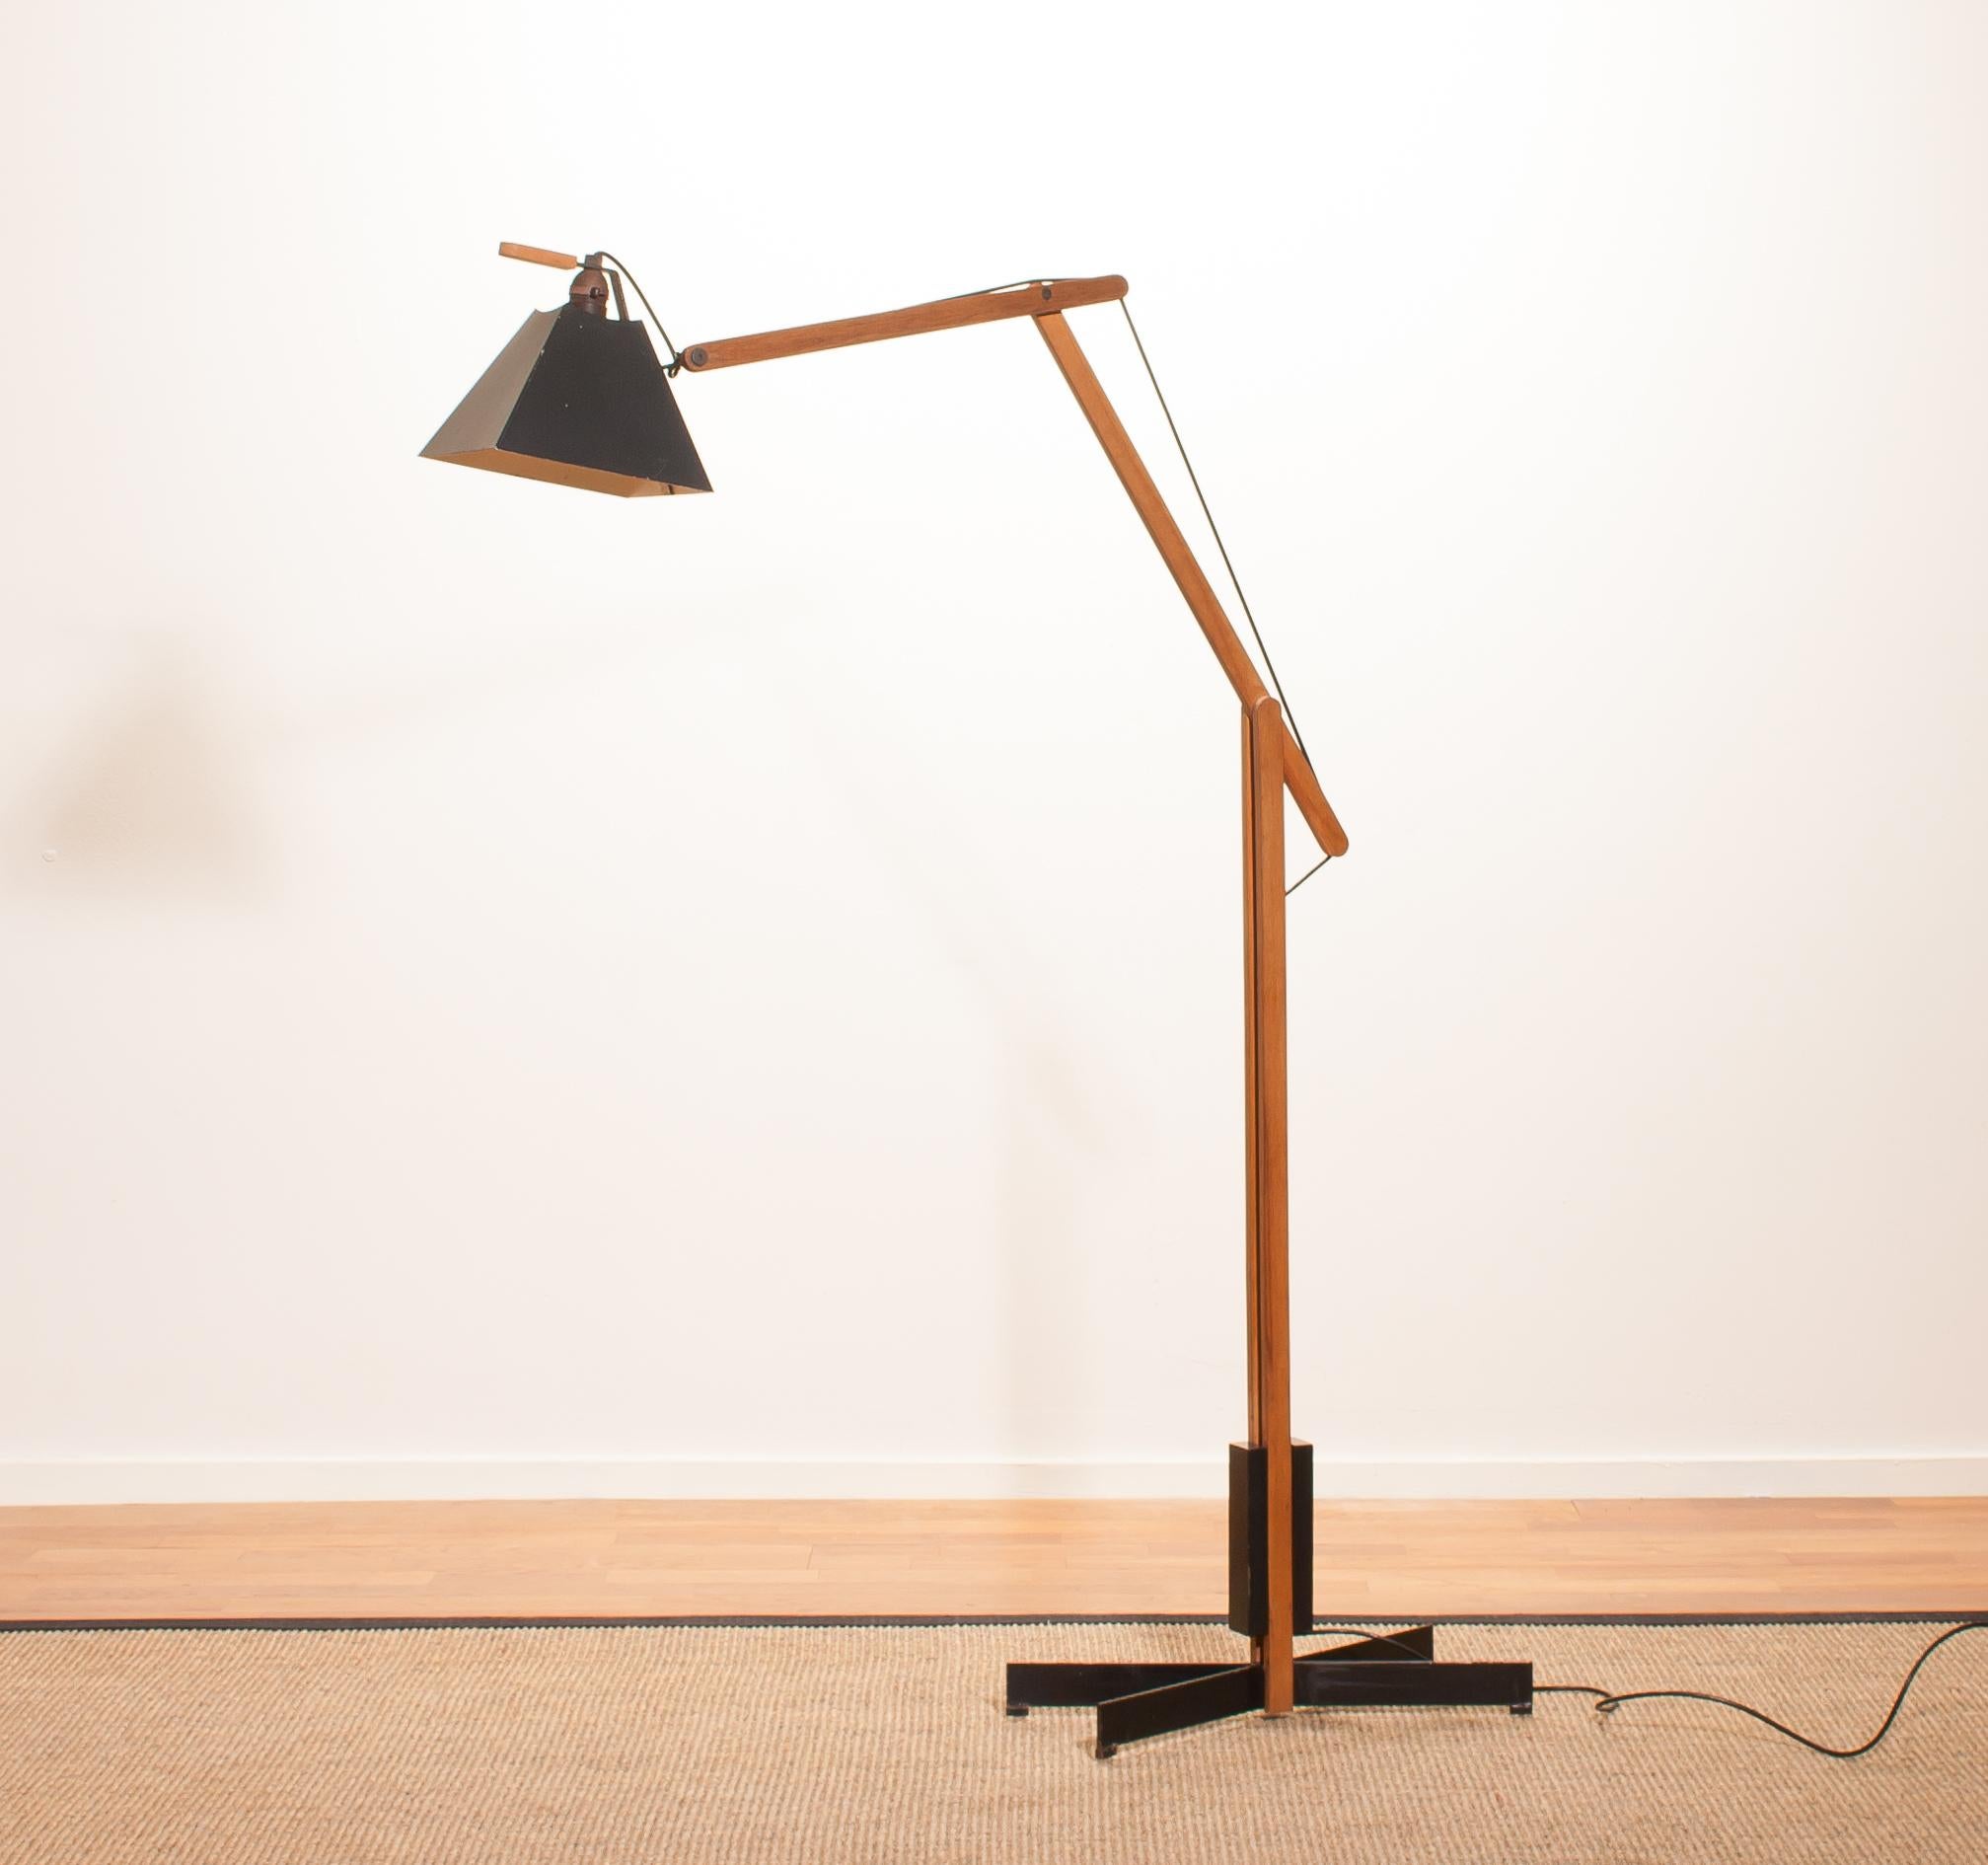 Magnificent rare floor lamp by Luxus, Sweden.
This lamp is adjustable by a counterbalance.
The stand is made of teak with a black lacquered shade.
It is labelled by Luxus and in a beautiful condition.
Period 1950s.
Dimensions: H 125 cm, D 90